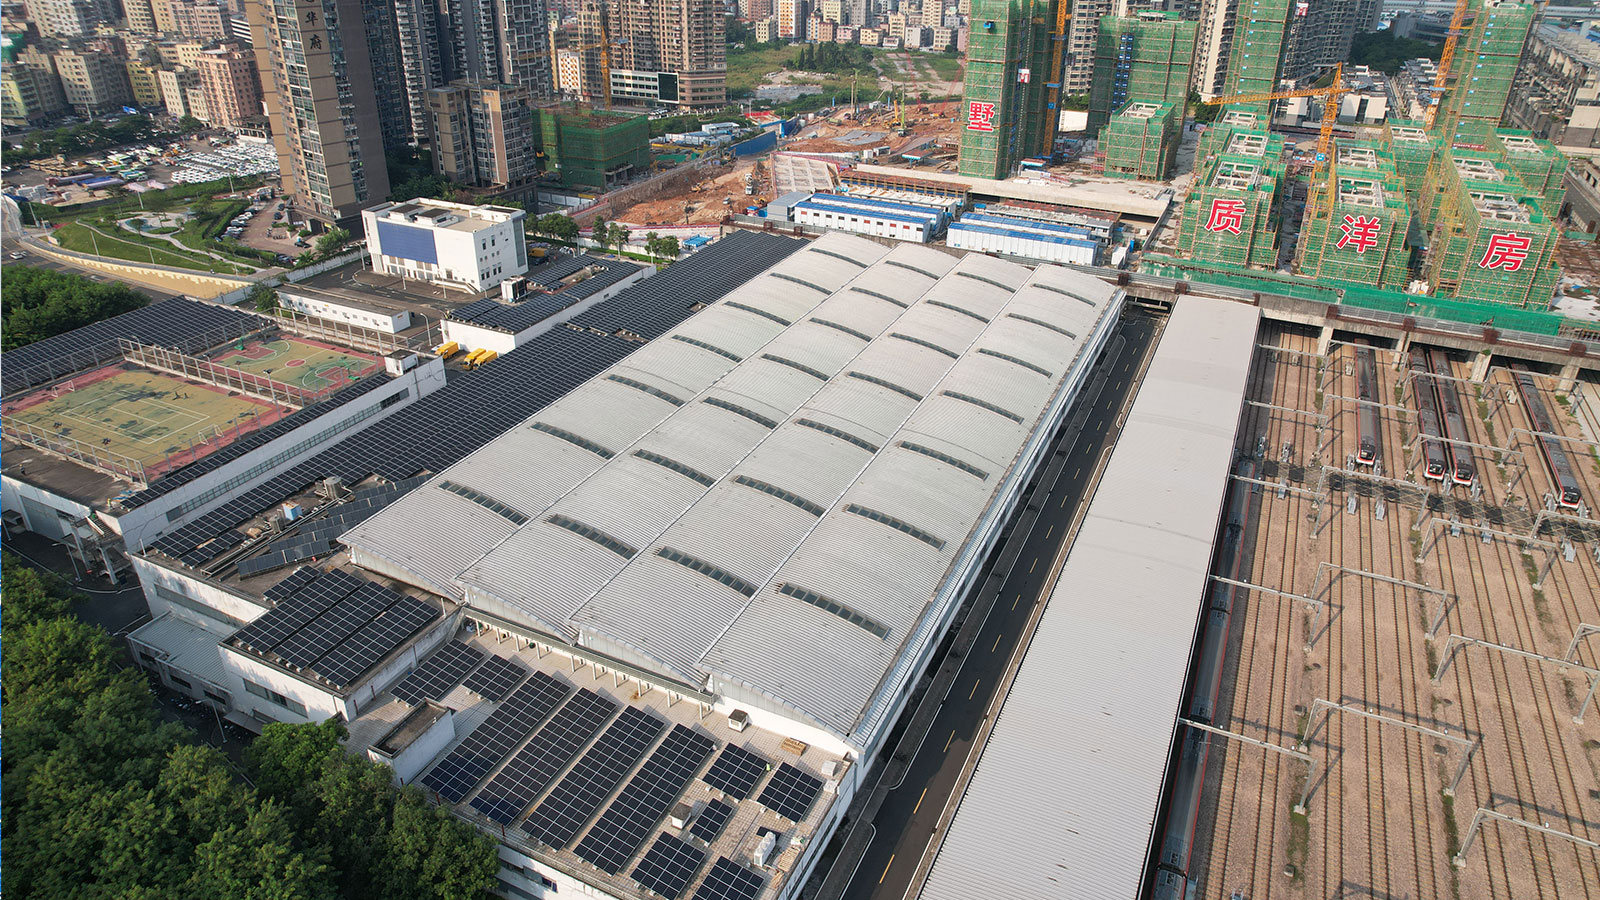 Construct a distributed solar project at the headquarters building of MTR Shenzhen